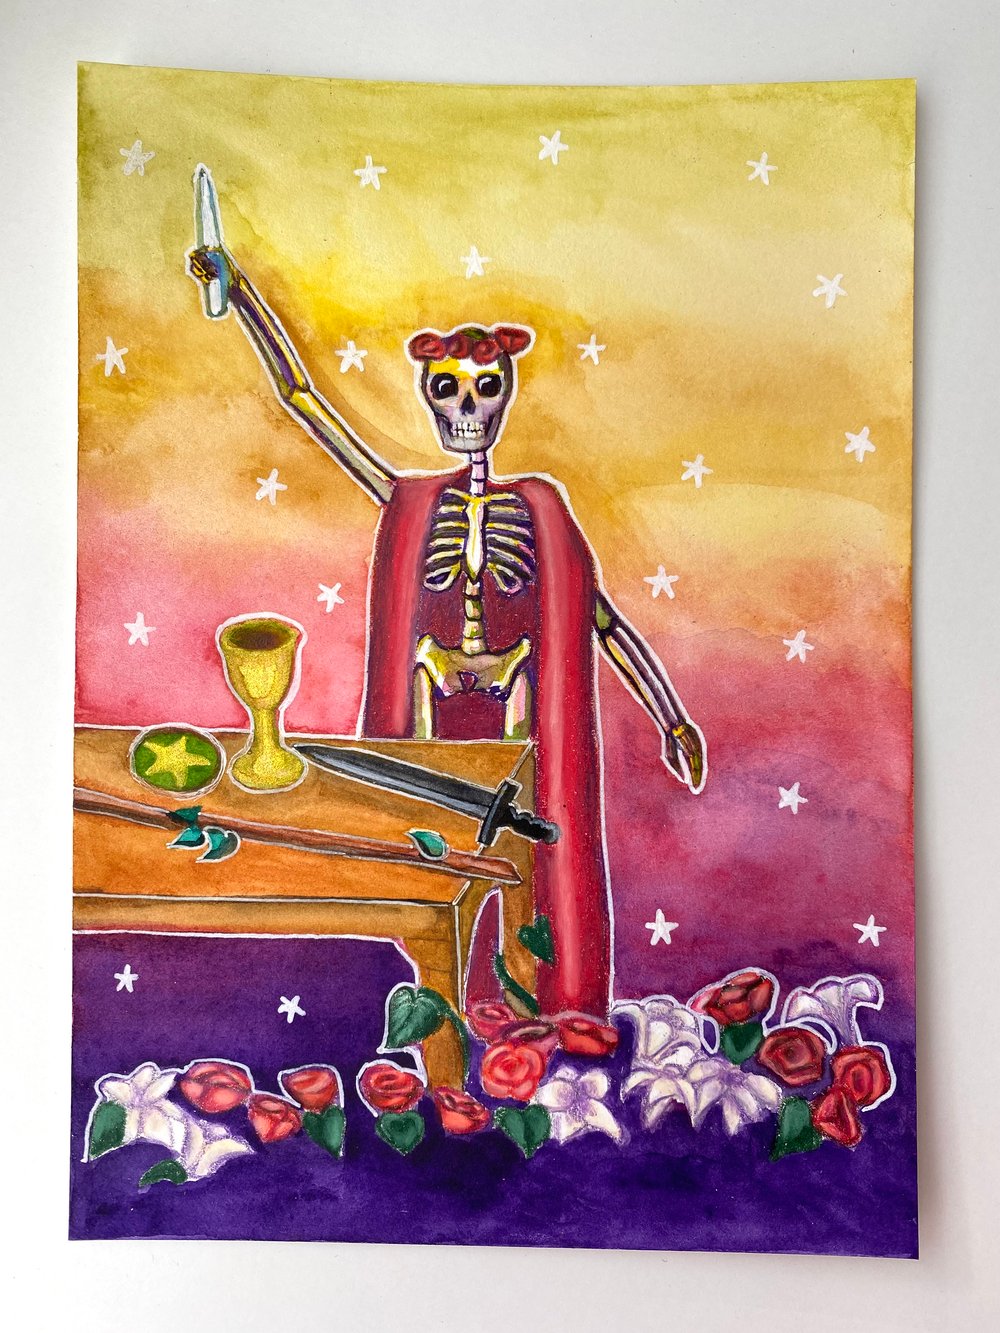 Image of "The Magician" Original Painting